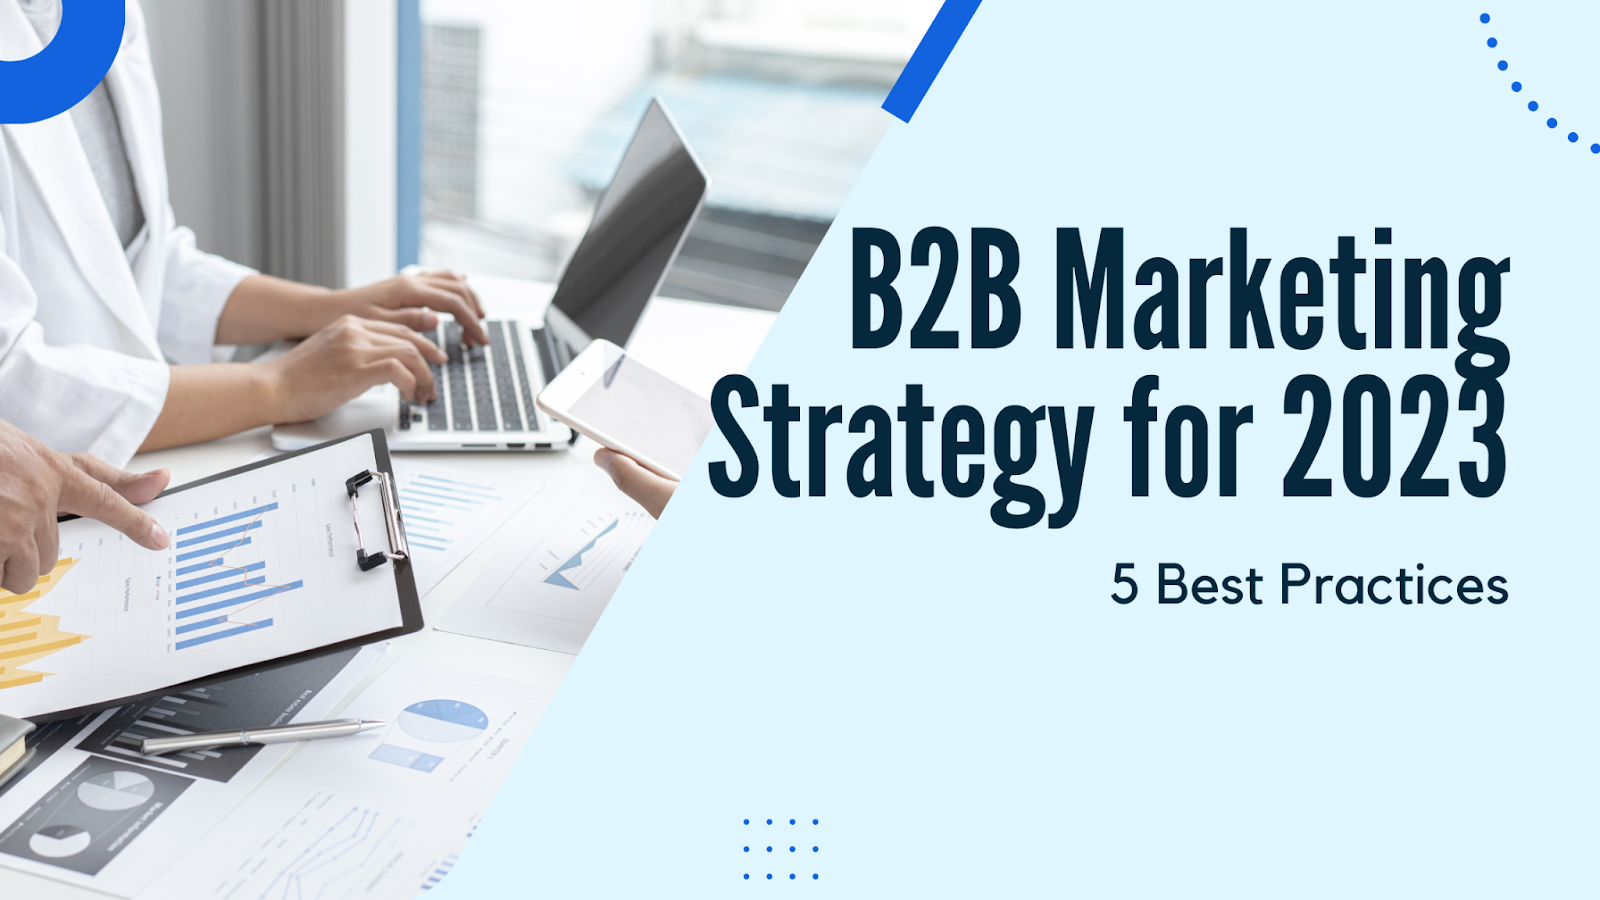 B2B Marketing Strategy for 2023: 5 Best Practices